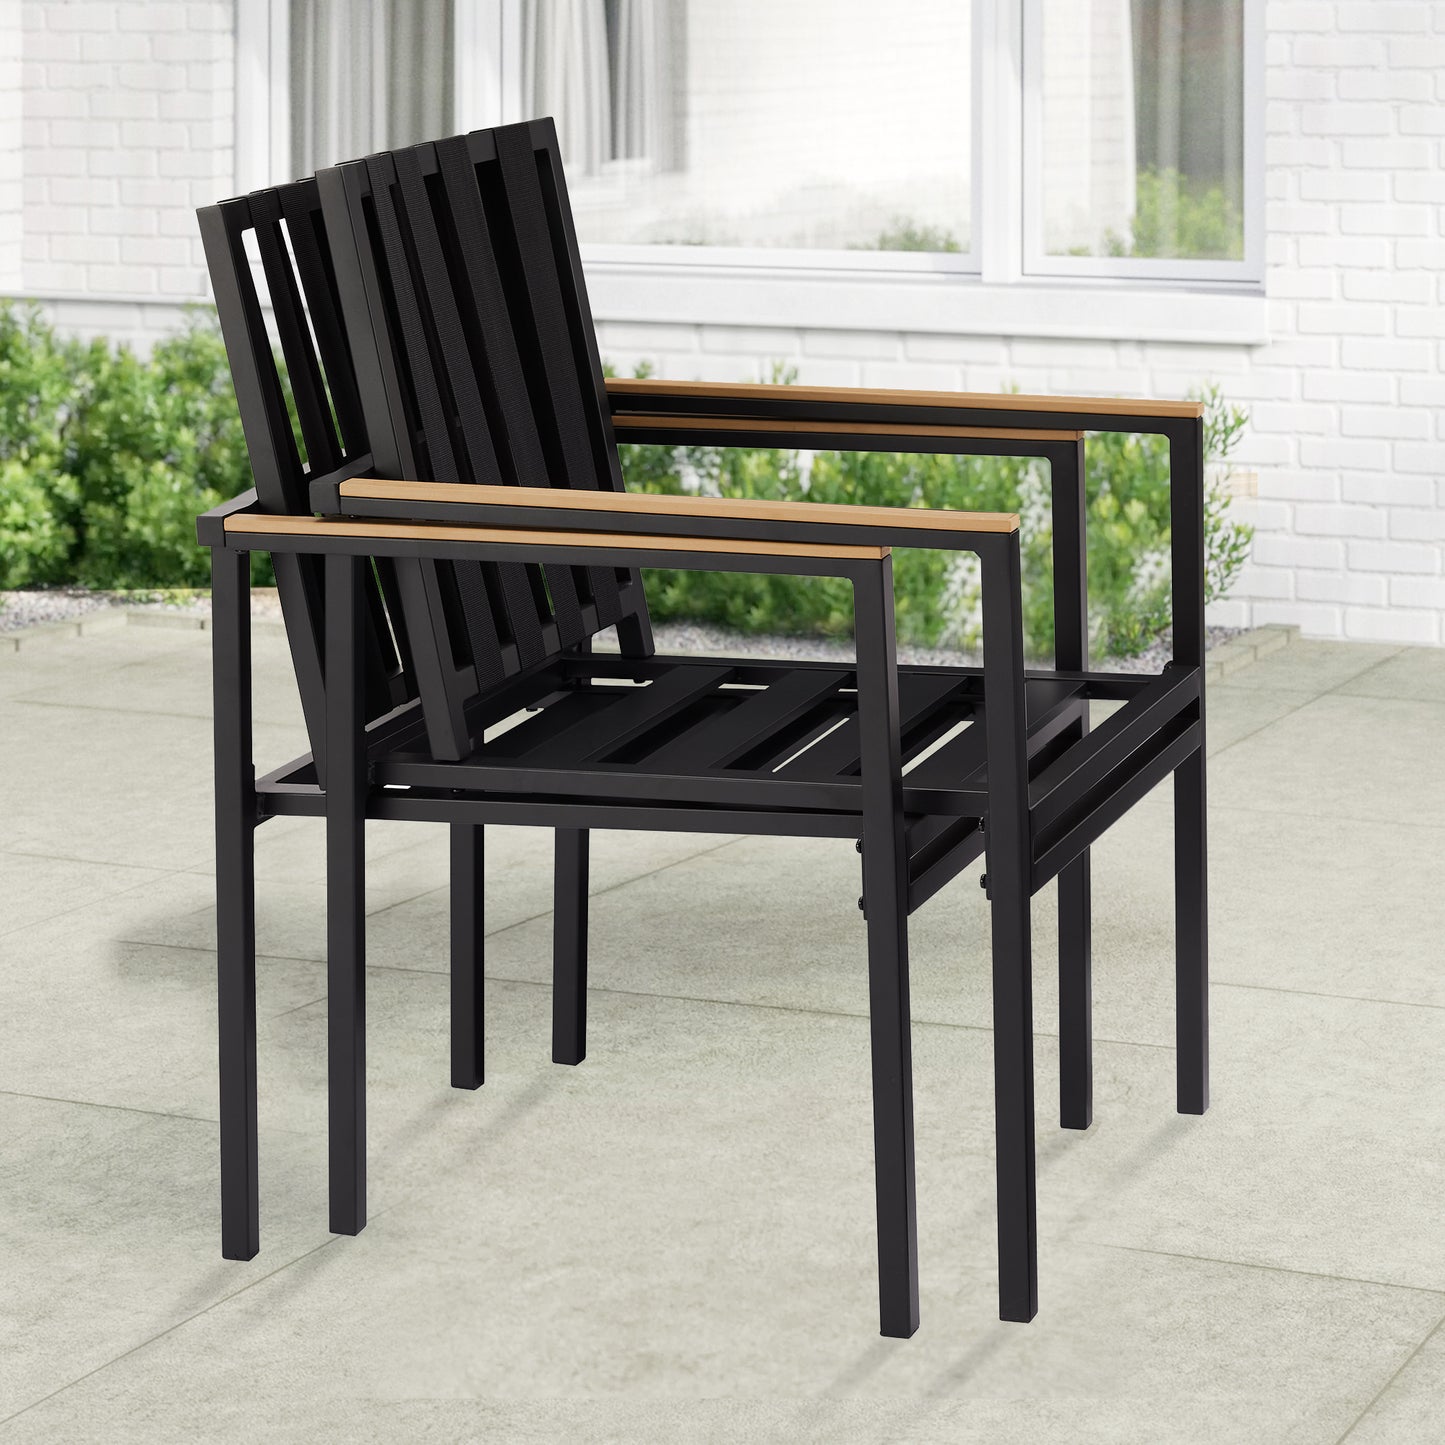 7 Piece Rectangular Patio Dining Set with 6 Stacking Dining Chairs and 1 Rectangular Aluminum Table Suitable for 6 People, Black